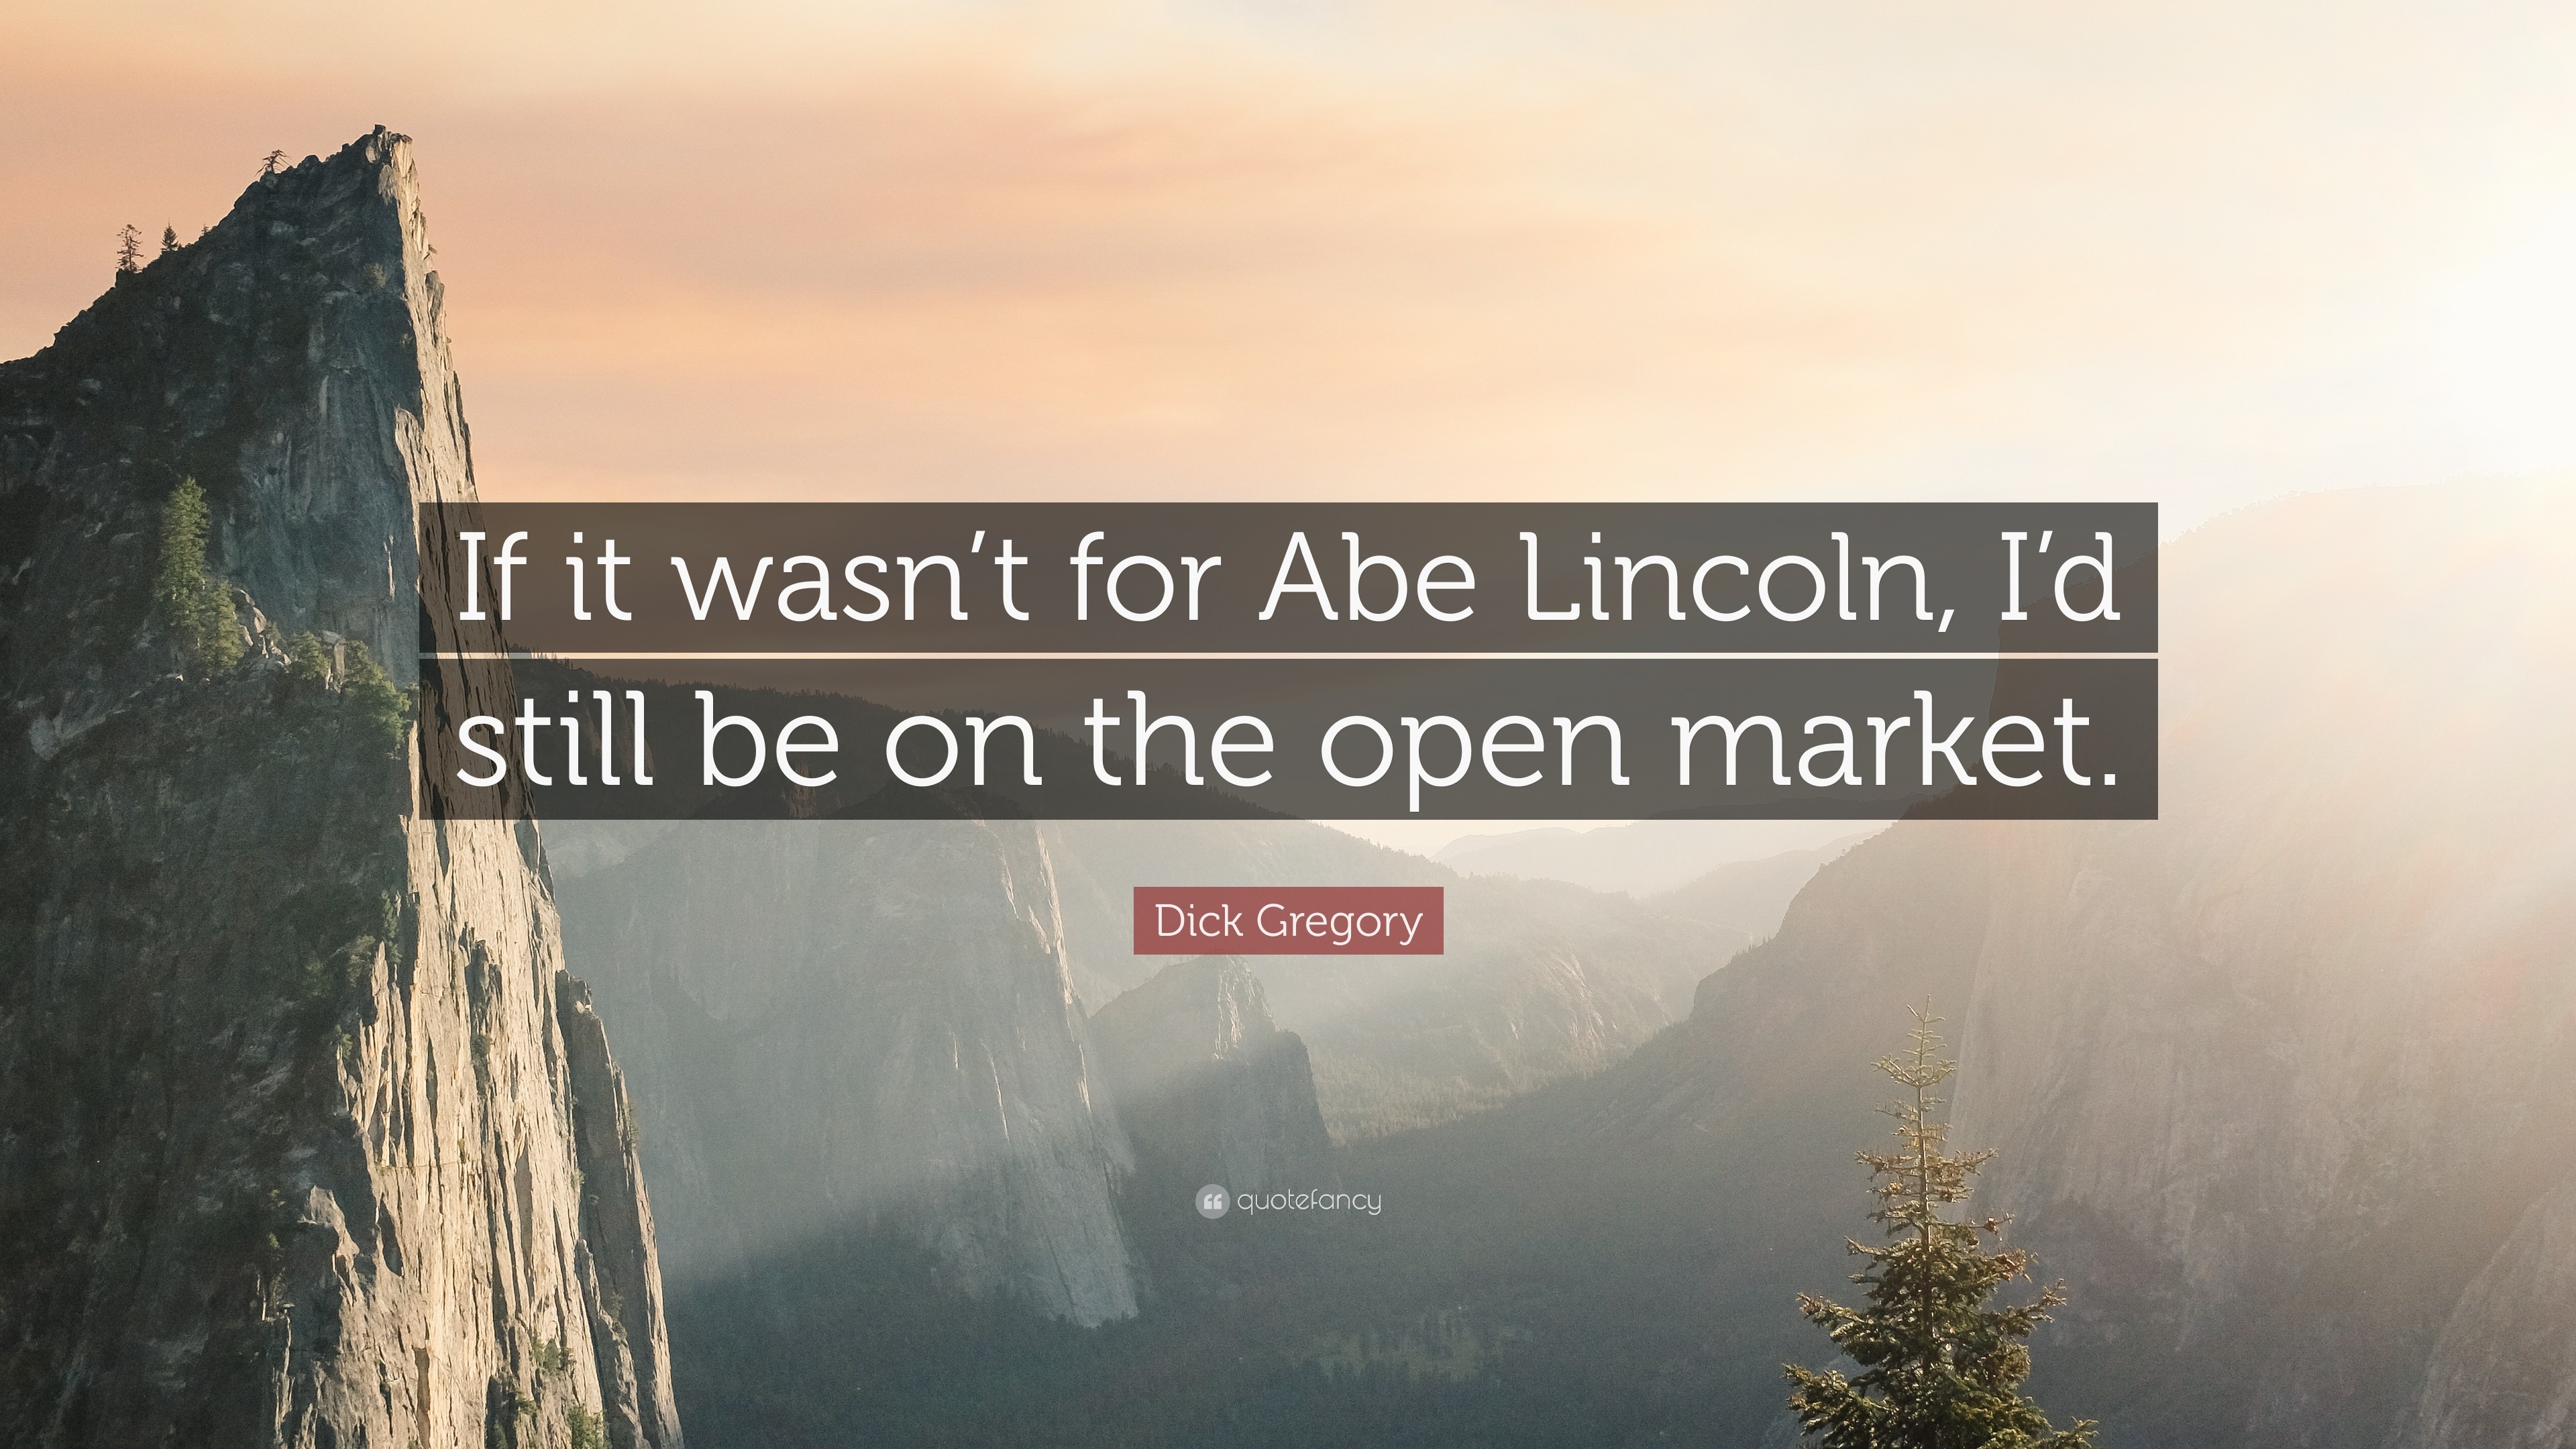 3840x2160 Dick Gregory Quote: “If it wasn't for Abe Lincoln, I'